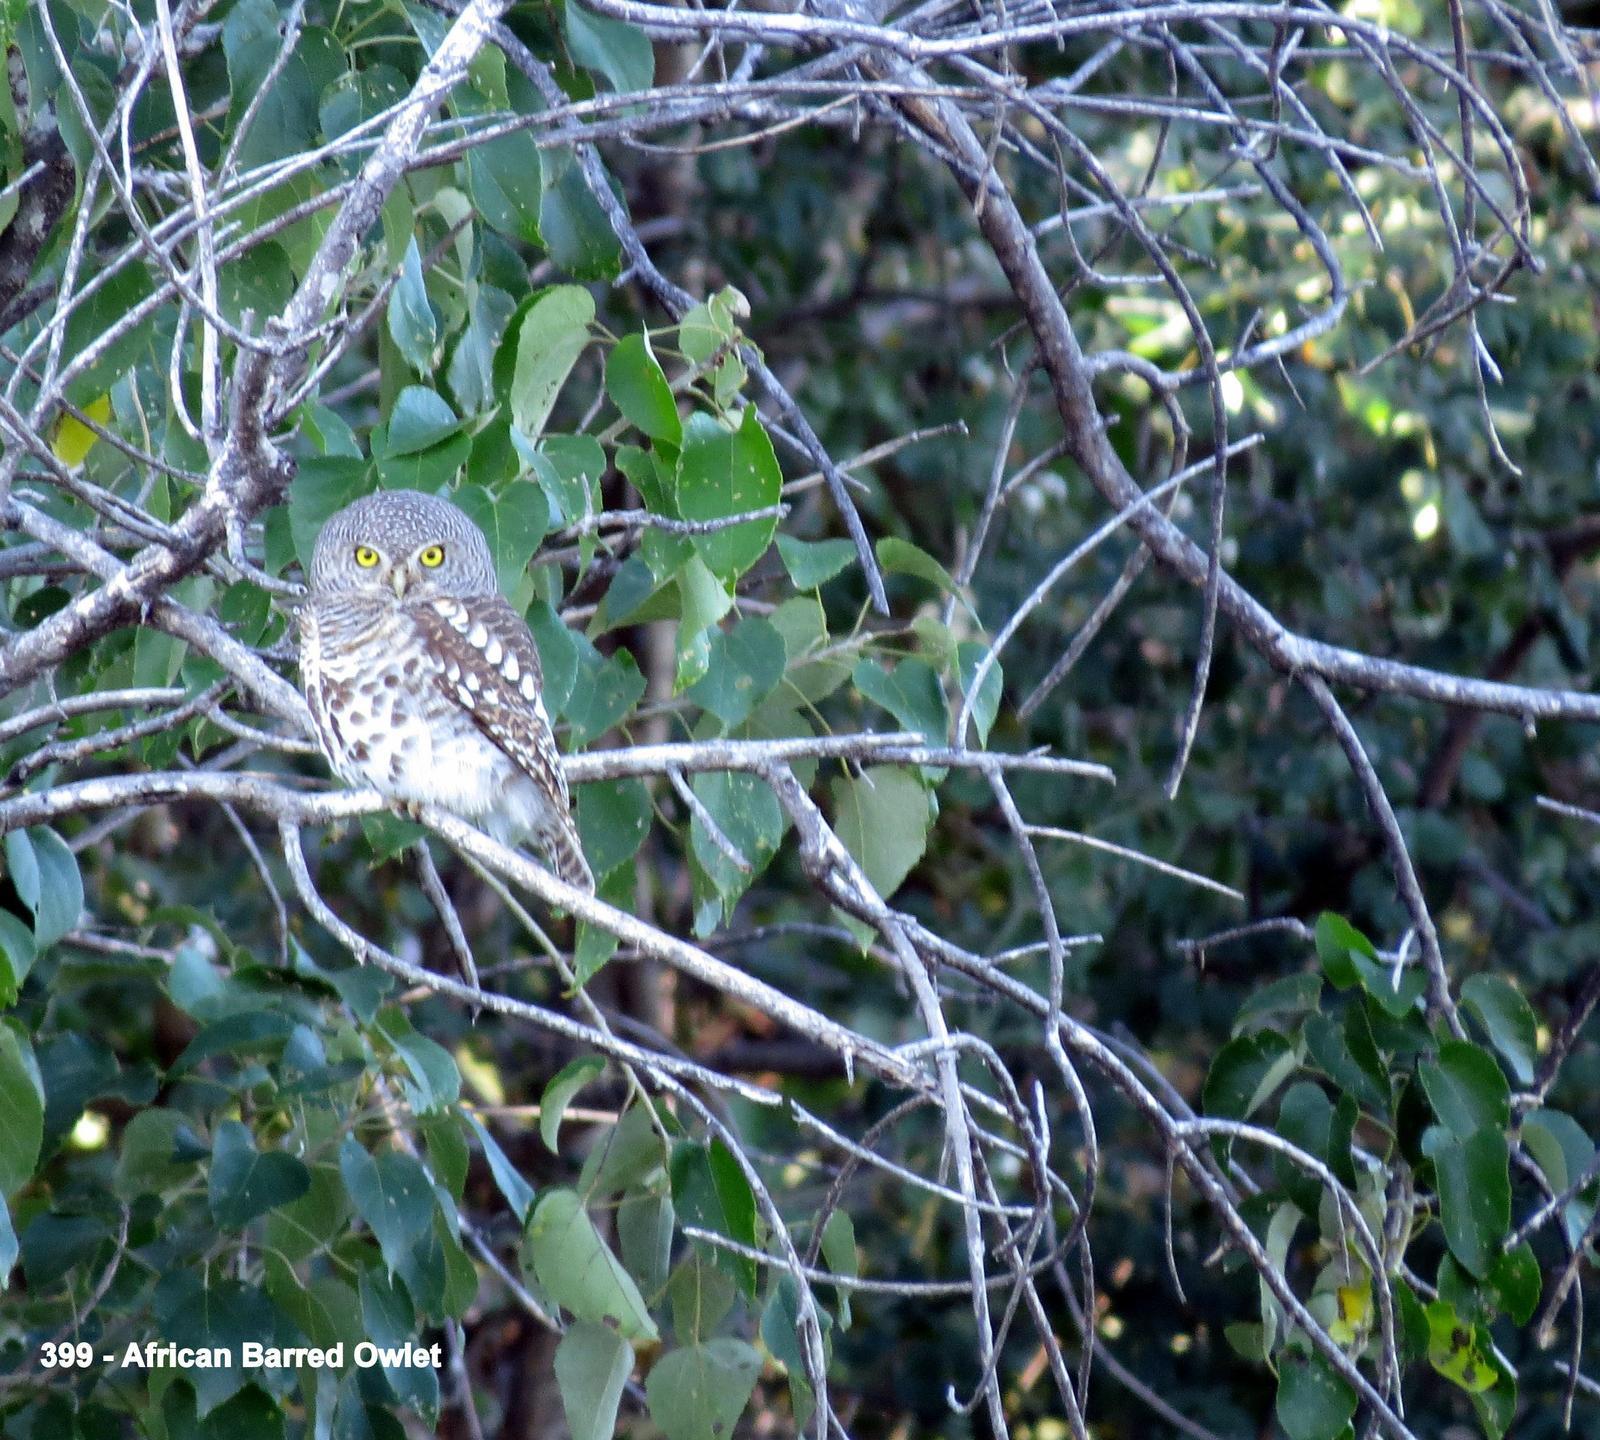 African Barred Owlet Photo by Richard  Lowe